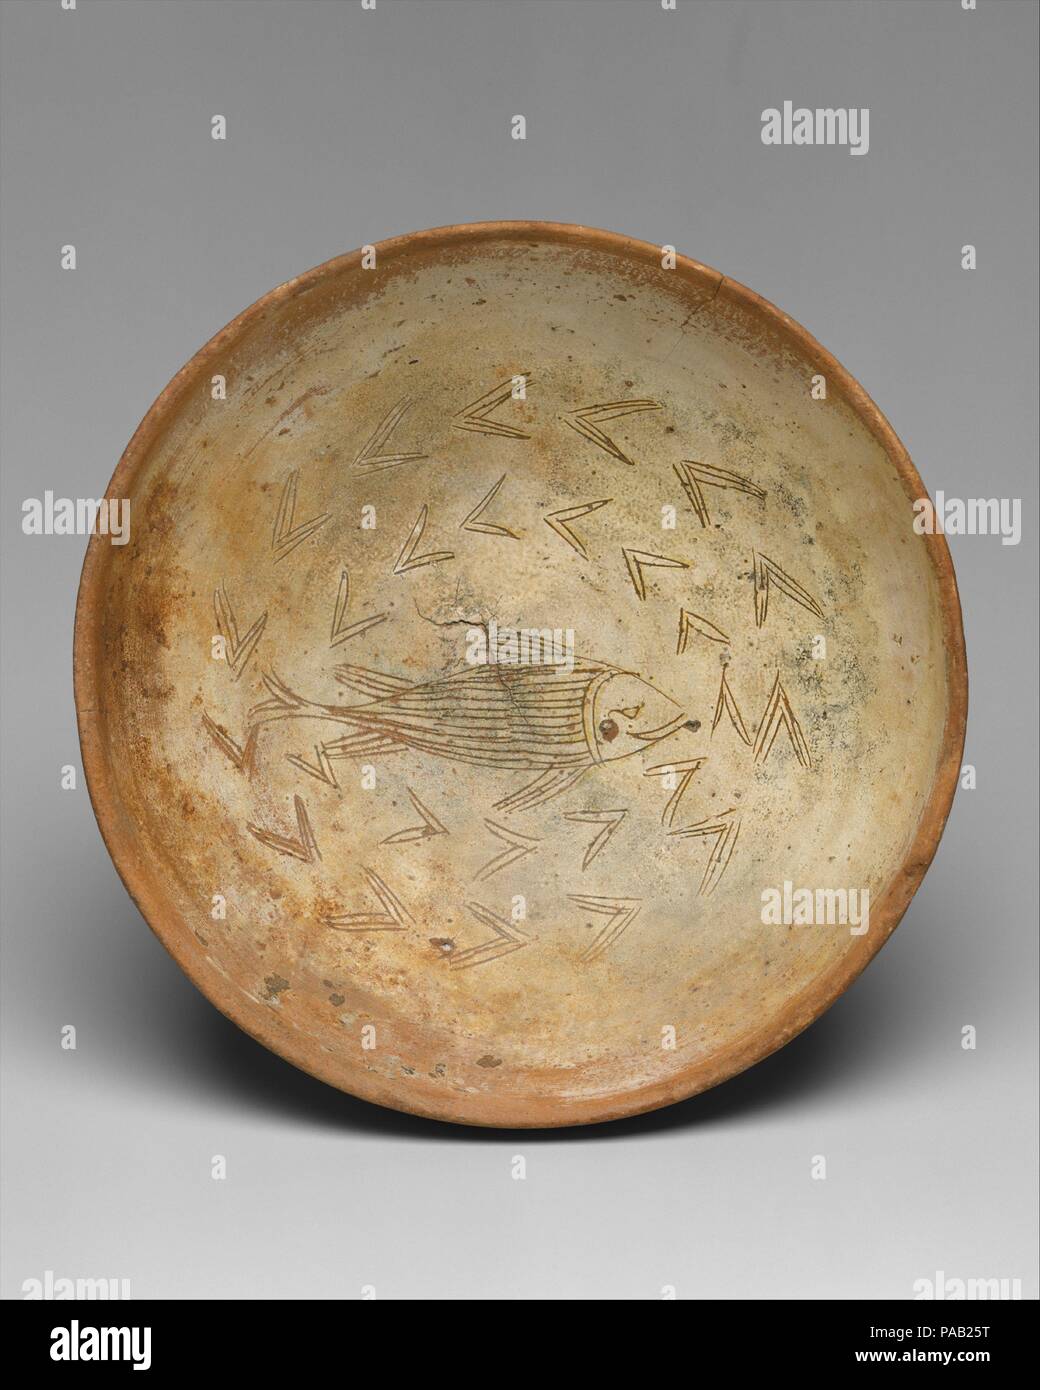 Bowl with Fish. Culture: Byzantine. Dimensions: Overall: 3 9/16 x 10 1/16 in. (9 x 25.5 cm). Date: 1000-1300.  A fish wearing a playful smile swims among reeds. Fishing was an important trade in the Byzantine Empire. Large fish were often centerpieces of banquets and were given as valuable gifts. Museum: Metropolitan Museum of Art, New York, USA. Stock Photo